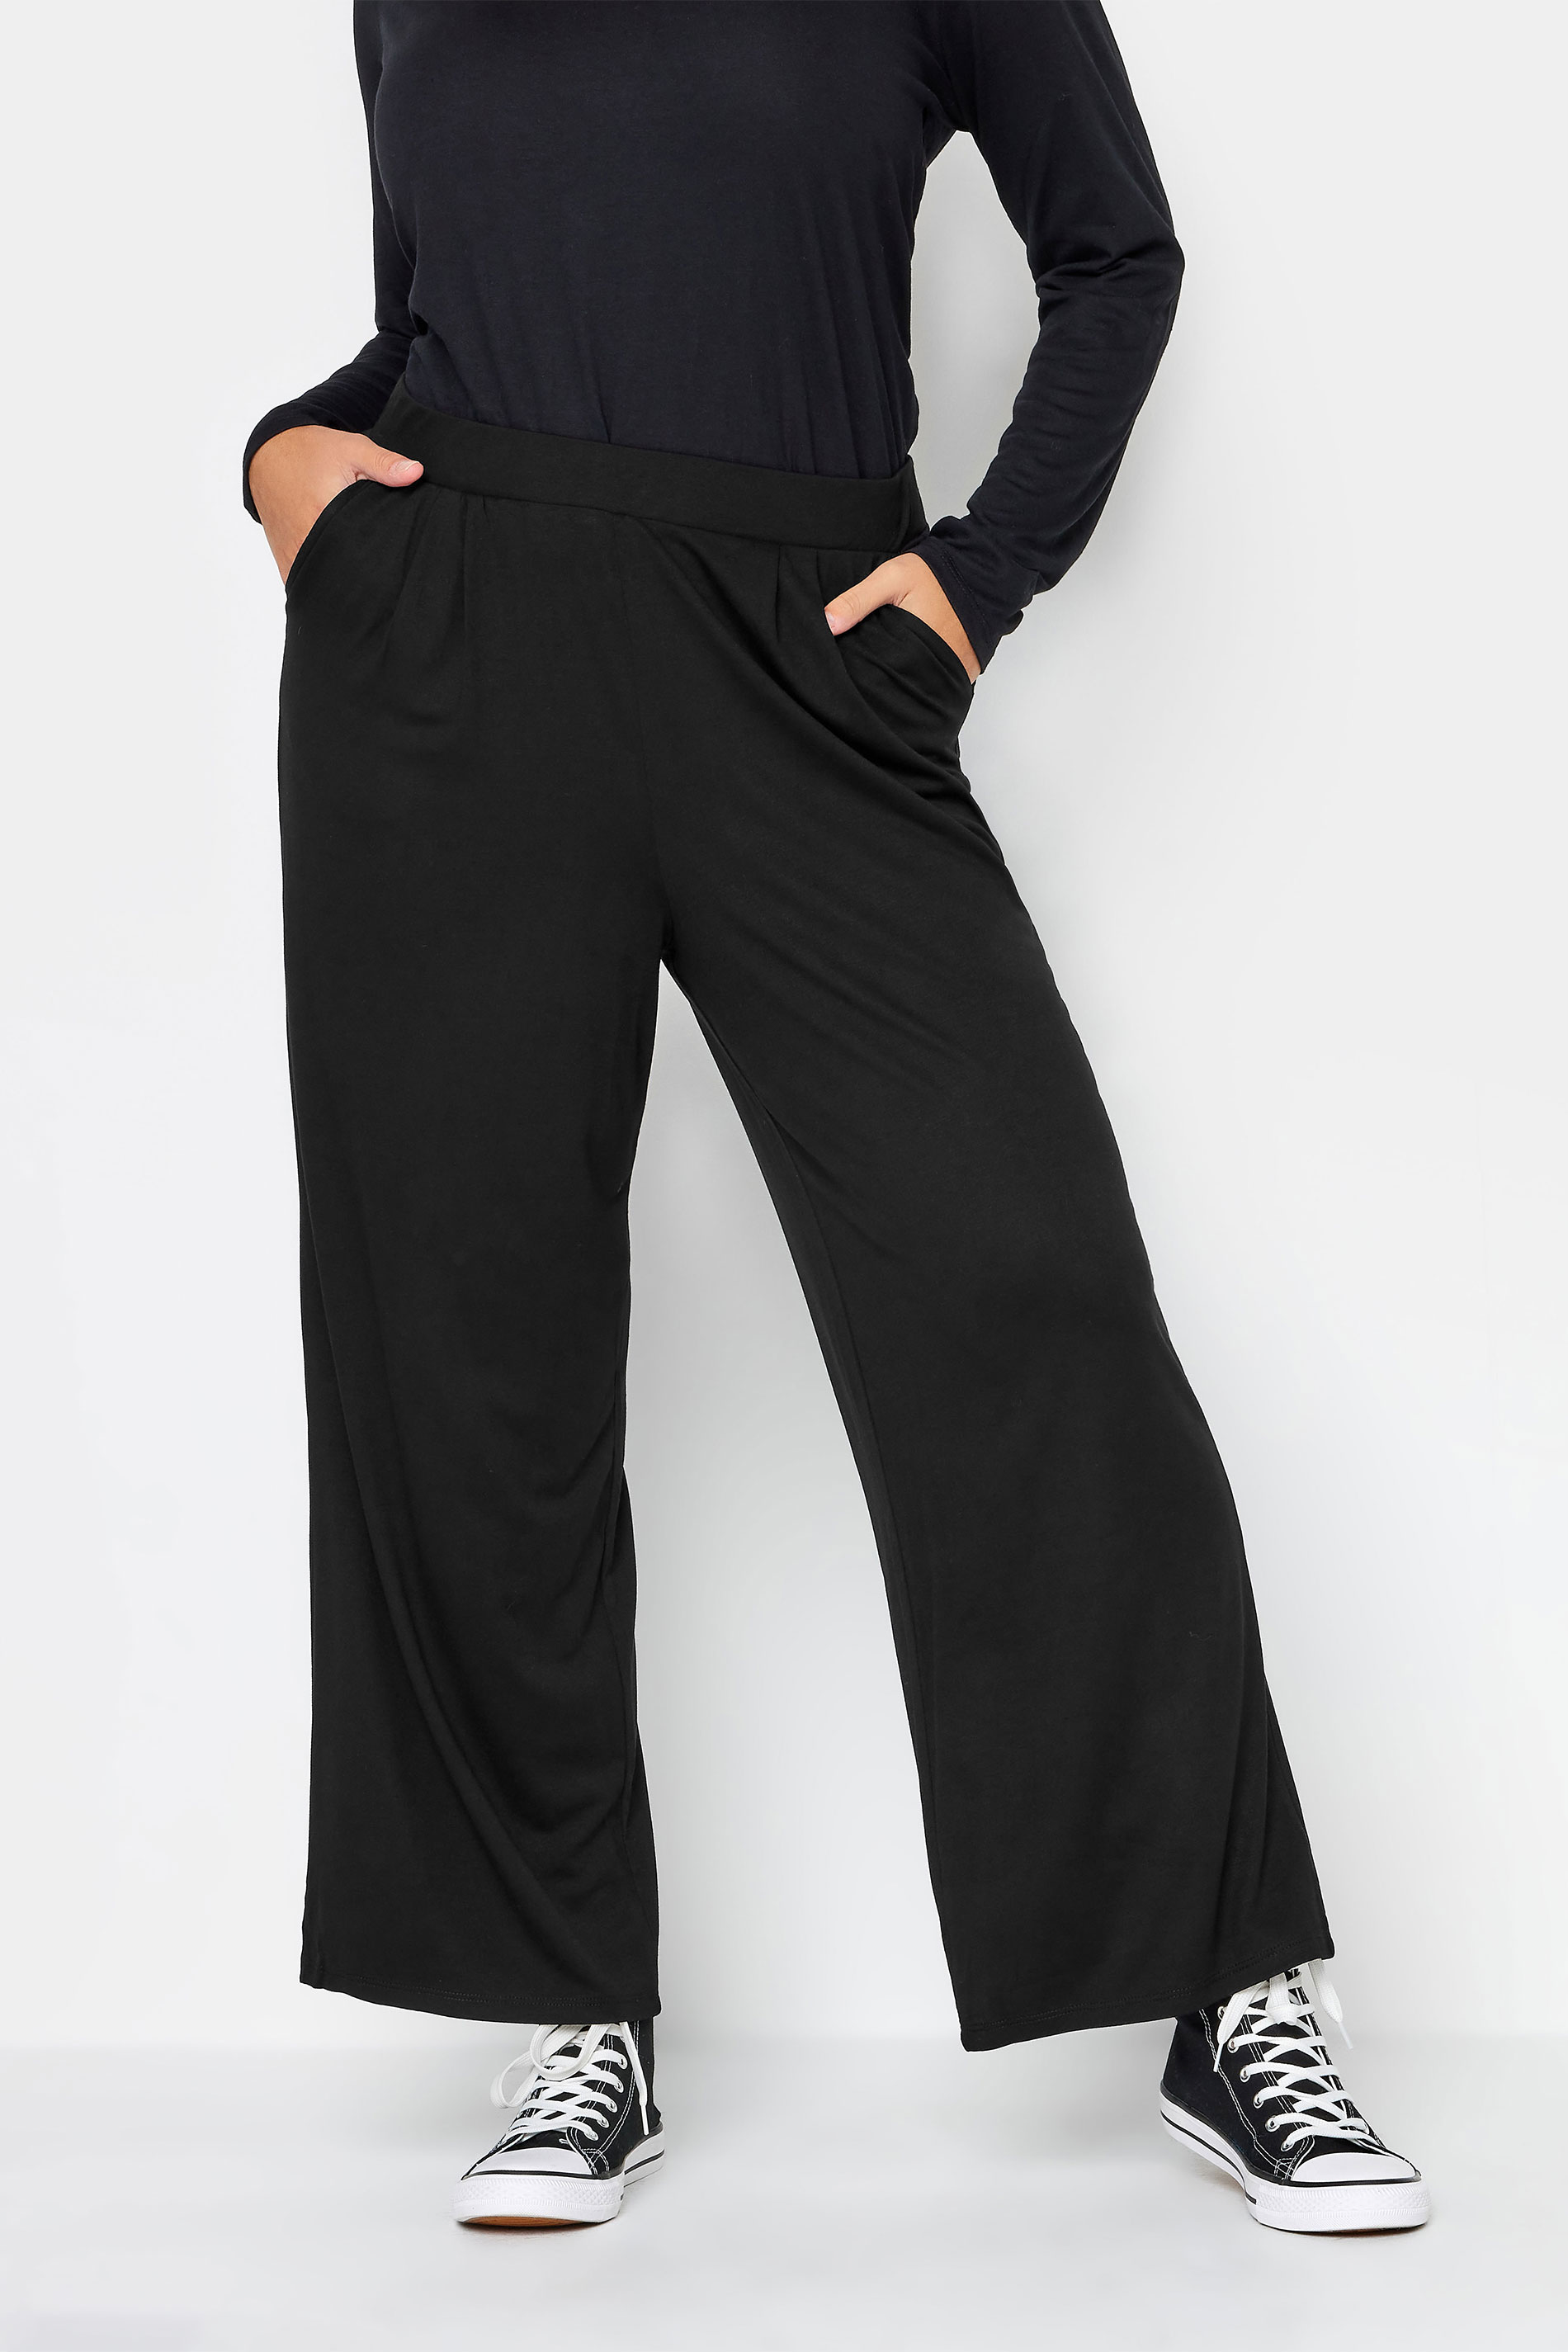 YOURS Curve Plus Size Black Pleated Wide Leg Stretch Trousers | Yours Clothing  1